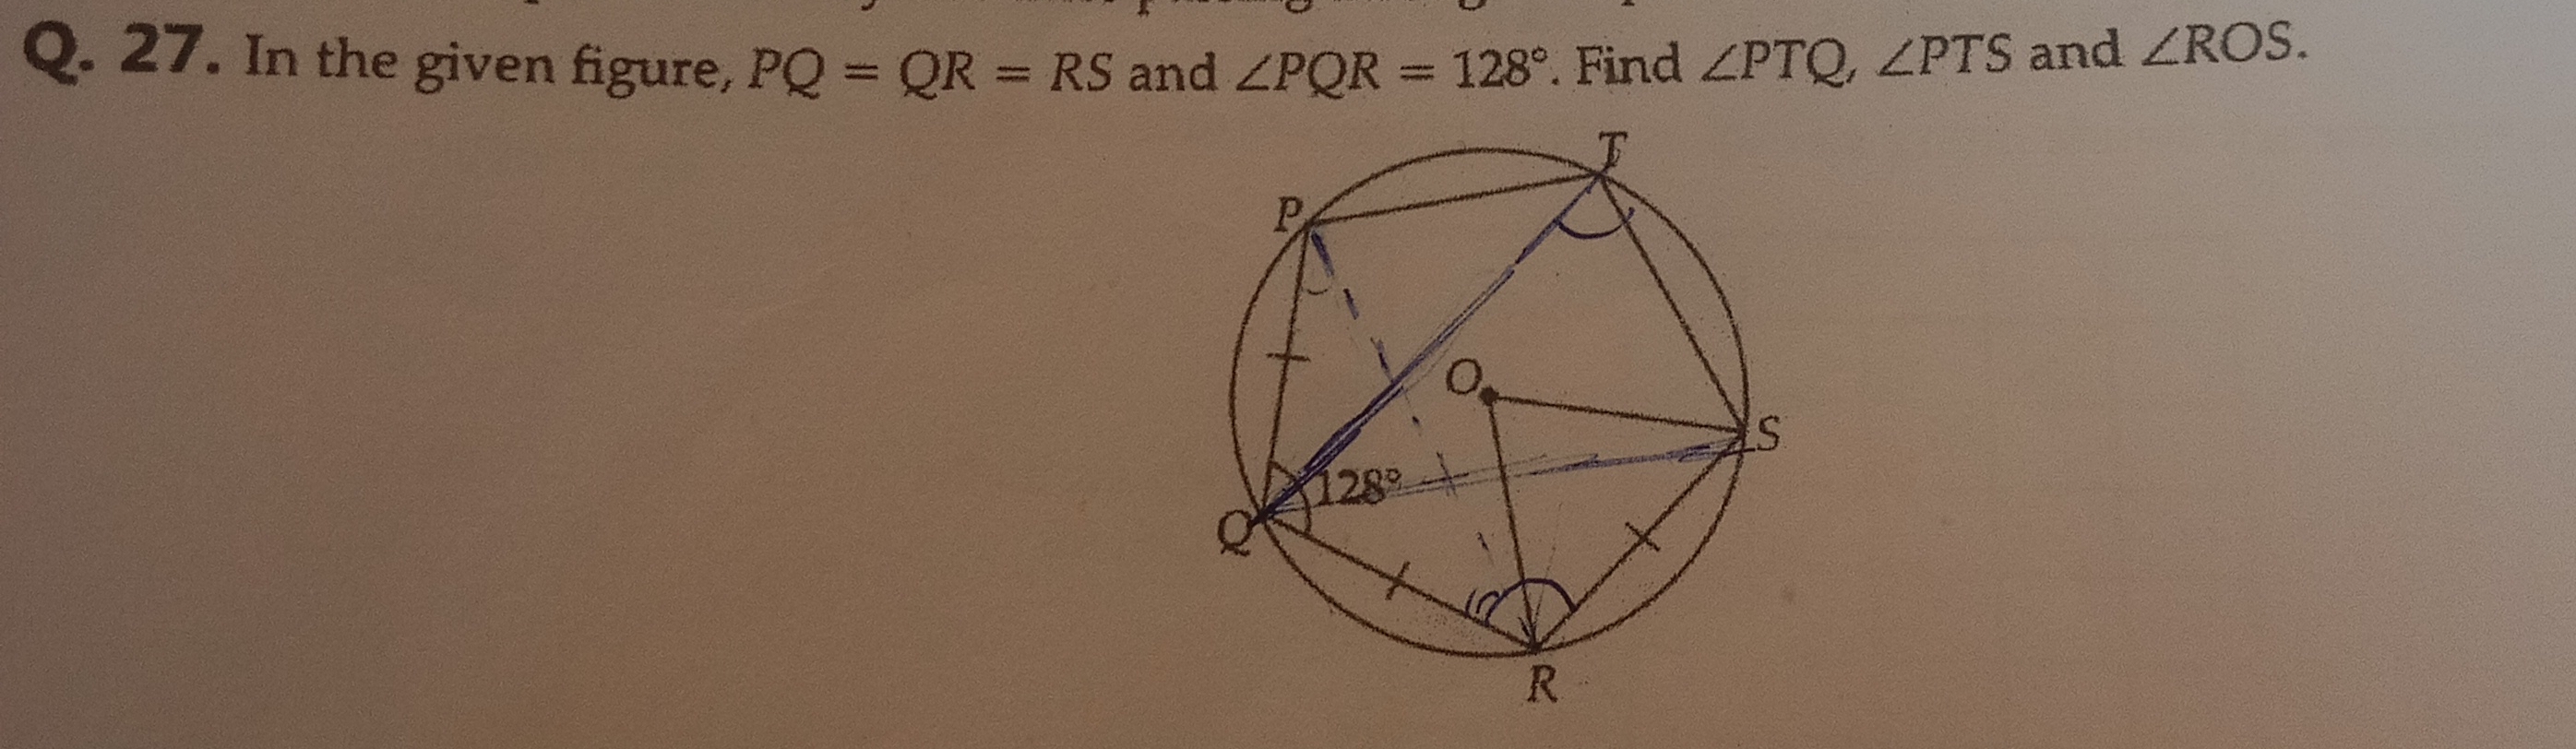 Q. 27. In the given figure, PQ=QR=RS and ∠PQR=128∘. Find ∠PTQ,∠PTS and